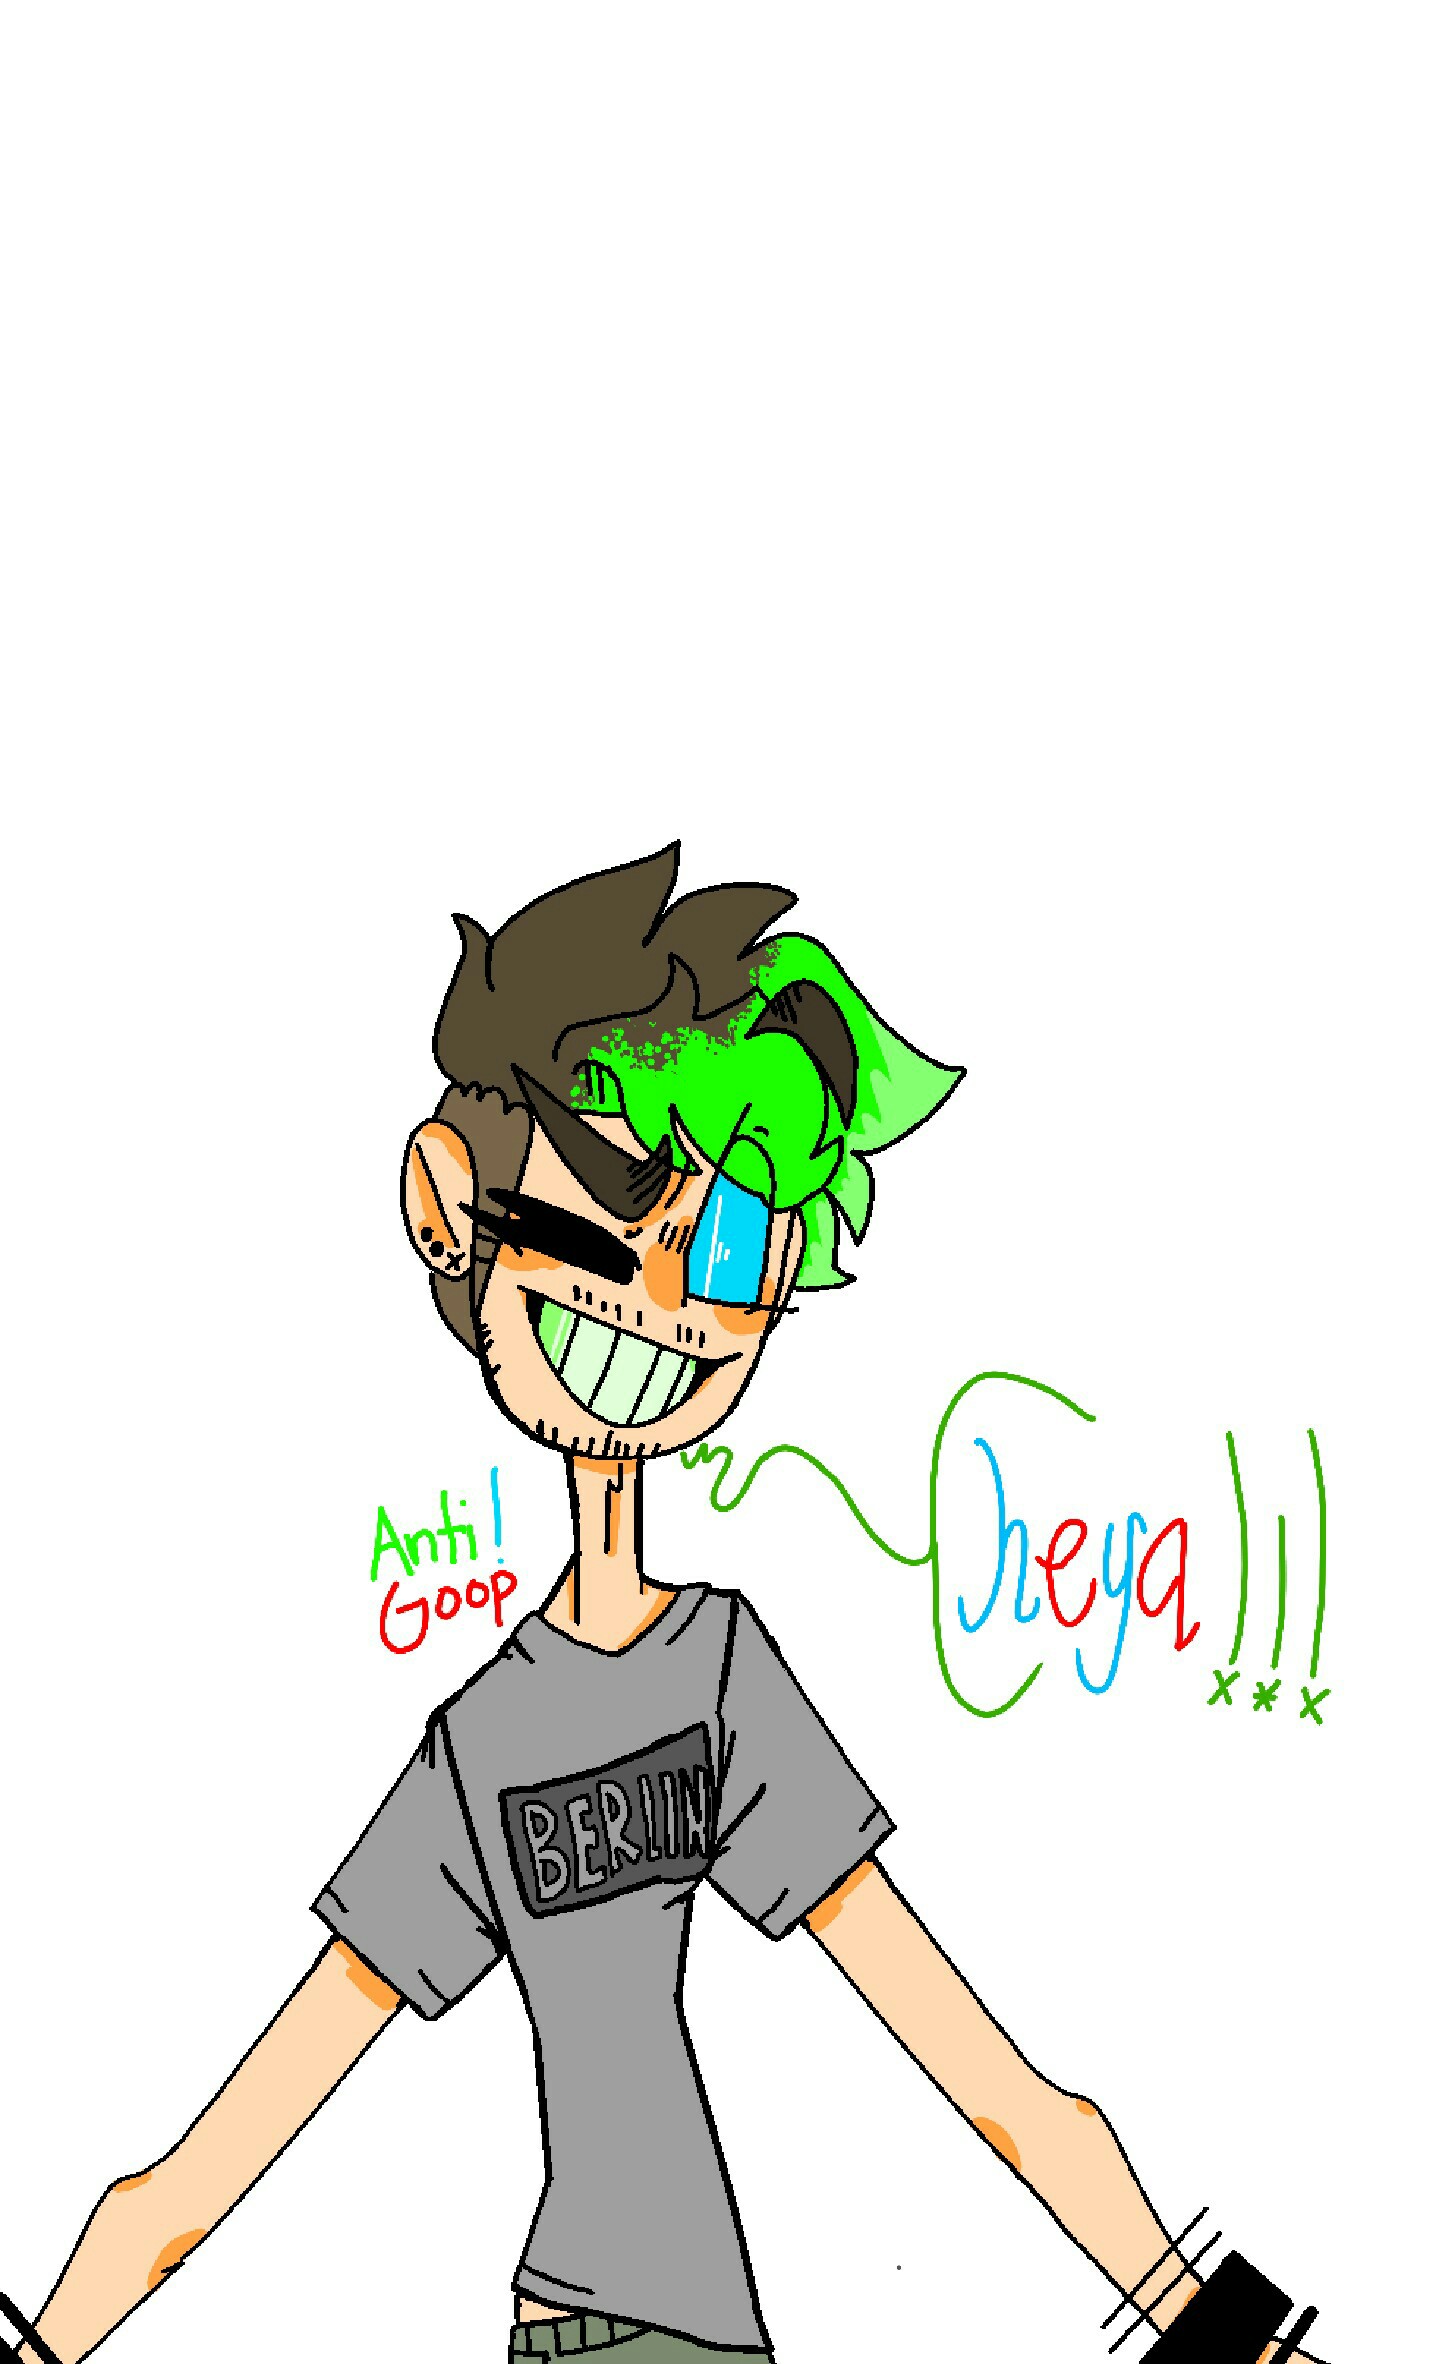 "HEYA!!!"
-I just wanted to make him again without his mask this time and I think I'm getting better in the body movements in a different style or stuff